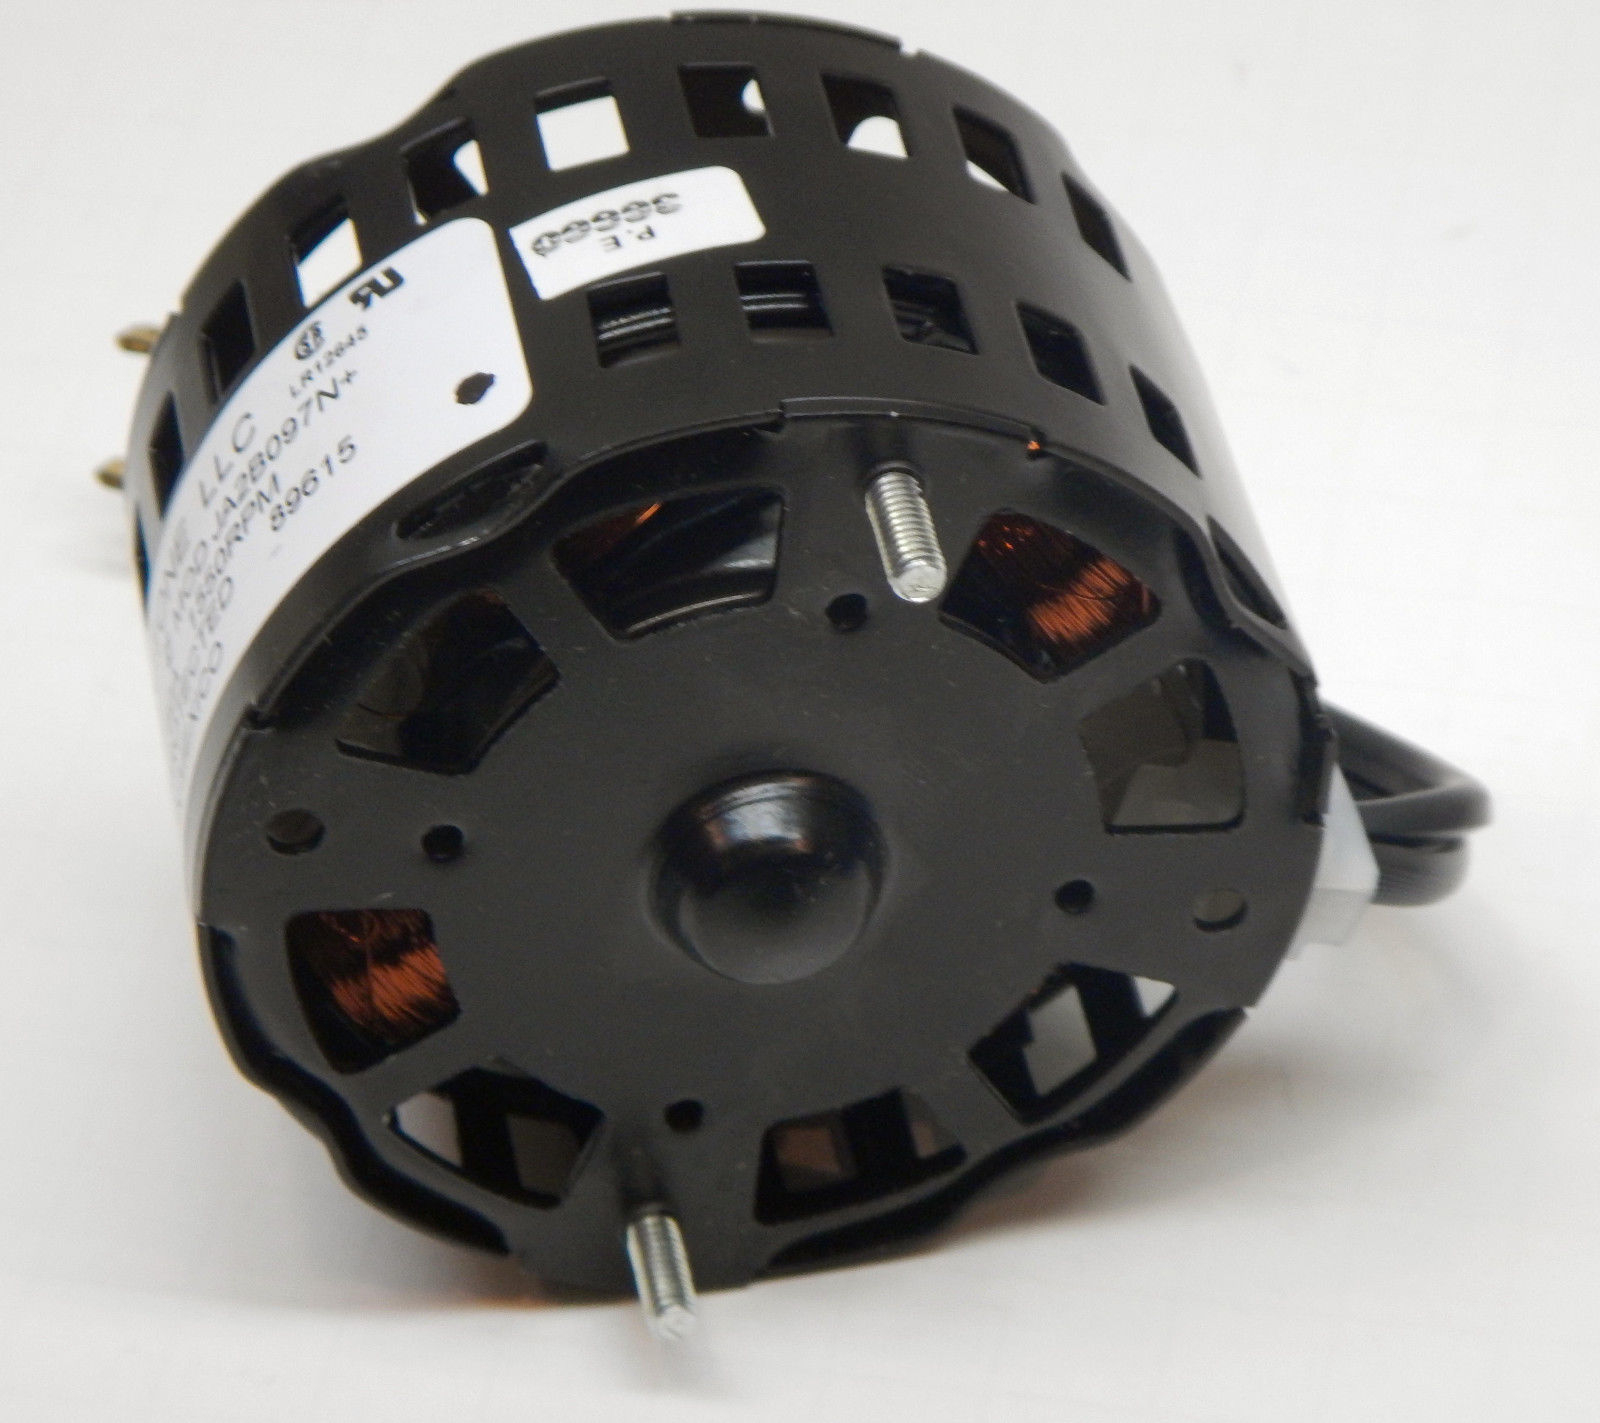 89615000 Broan Nutone Fan Motor For 89615 Ja2b097n S89615000 115 Volts 1550 Rpm intended for size 1600 X 1423